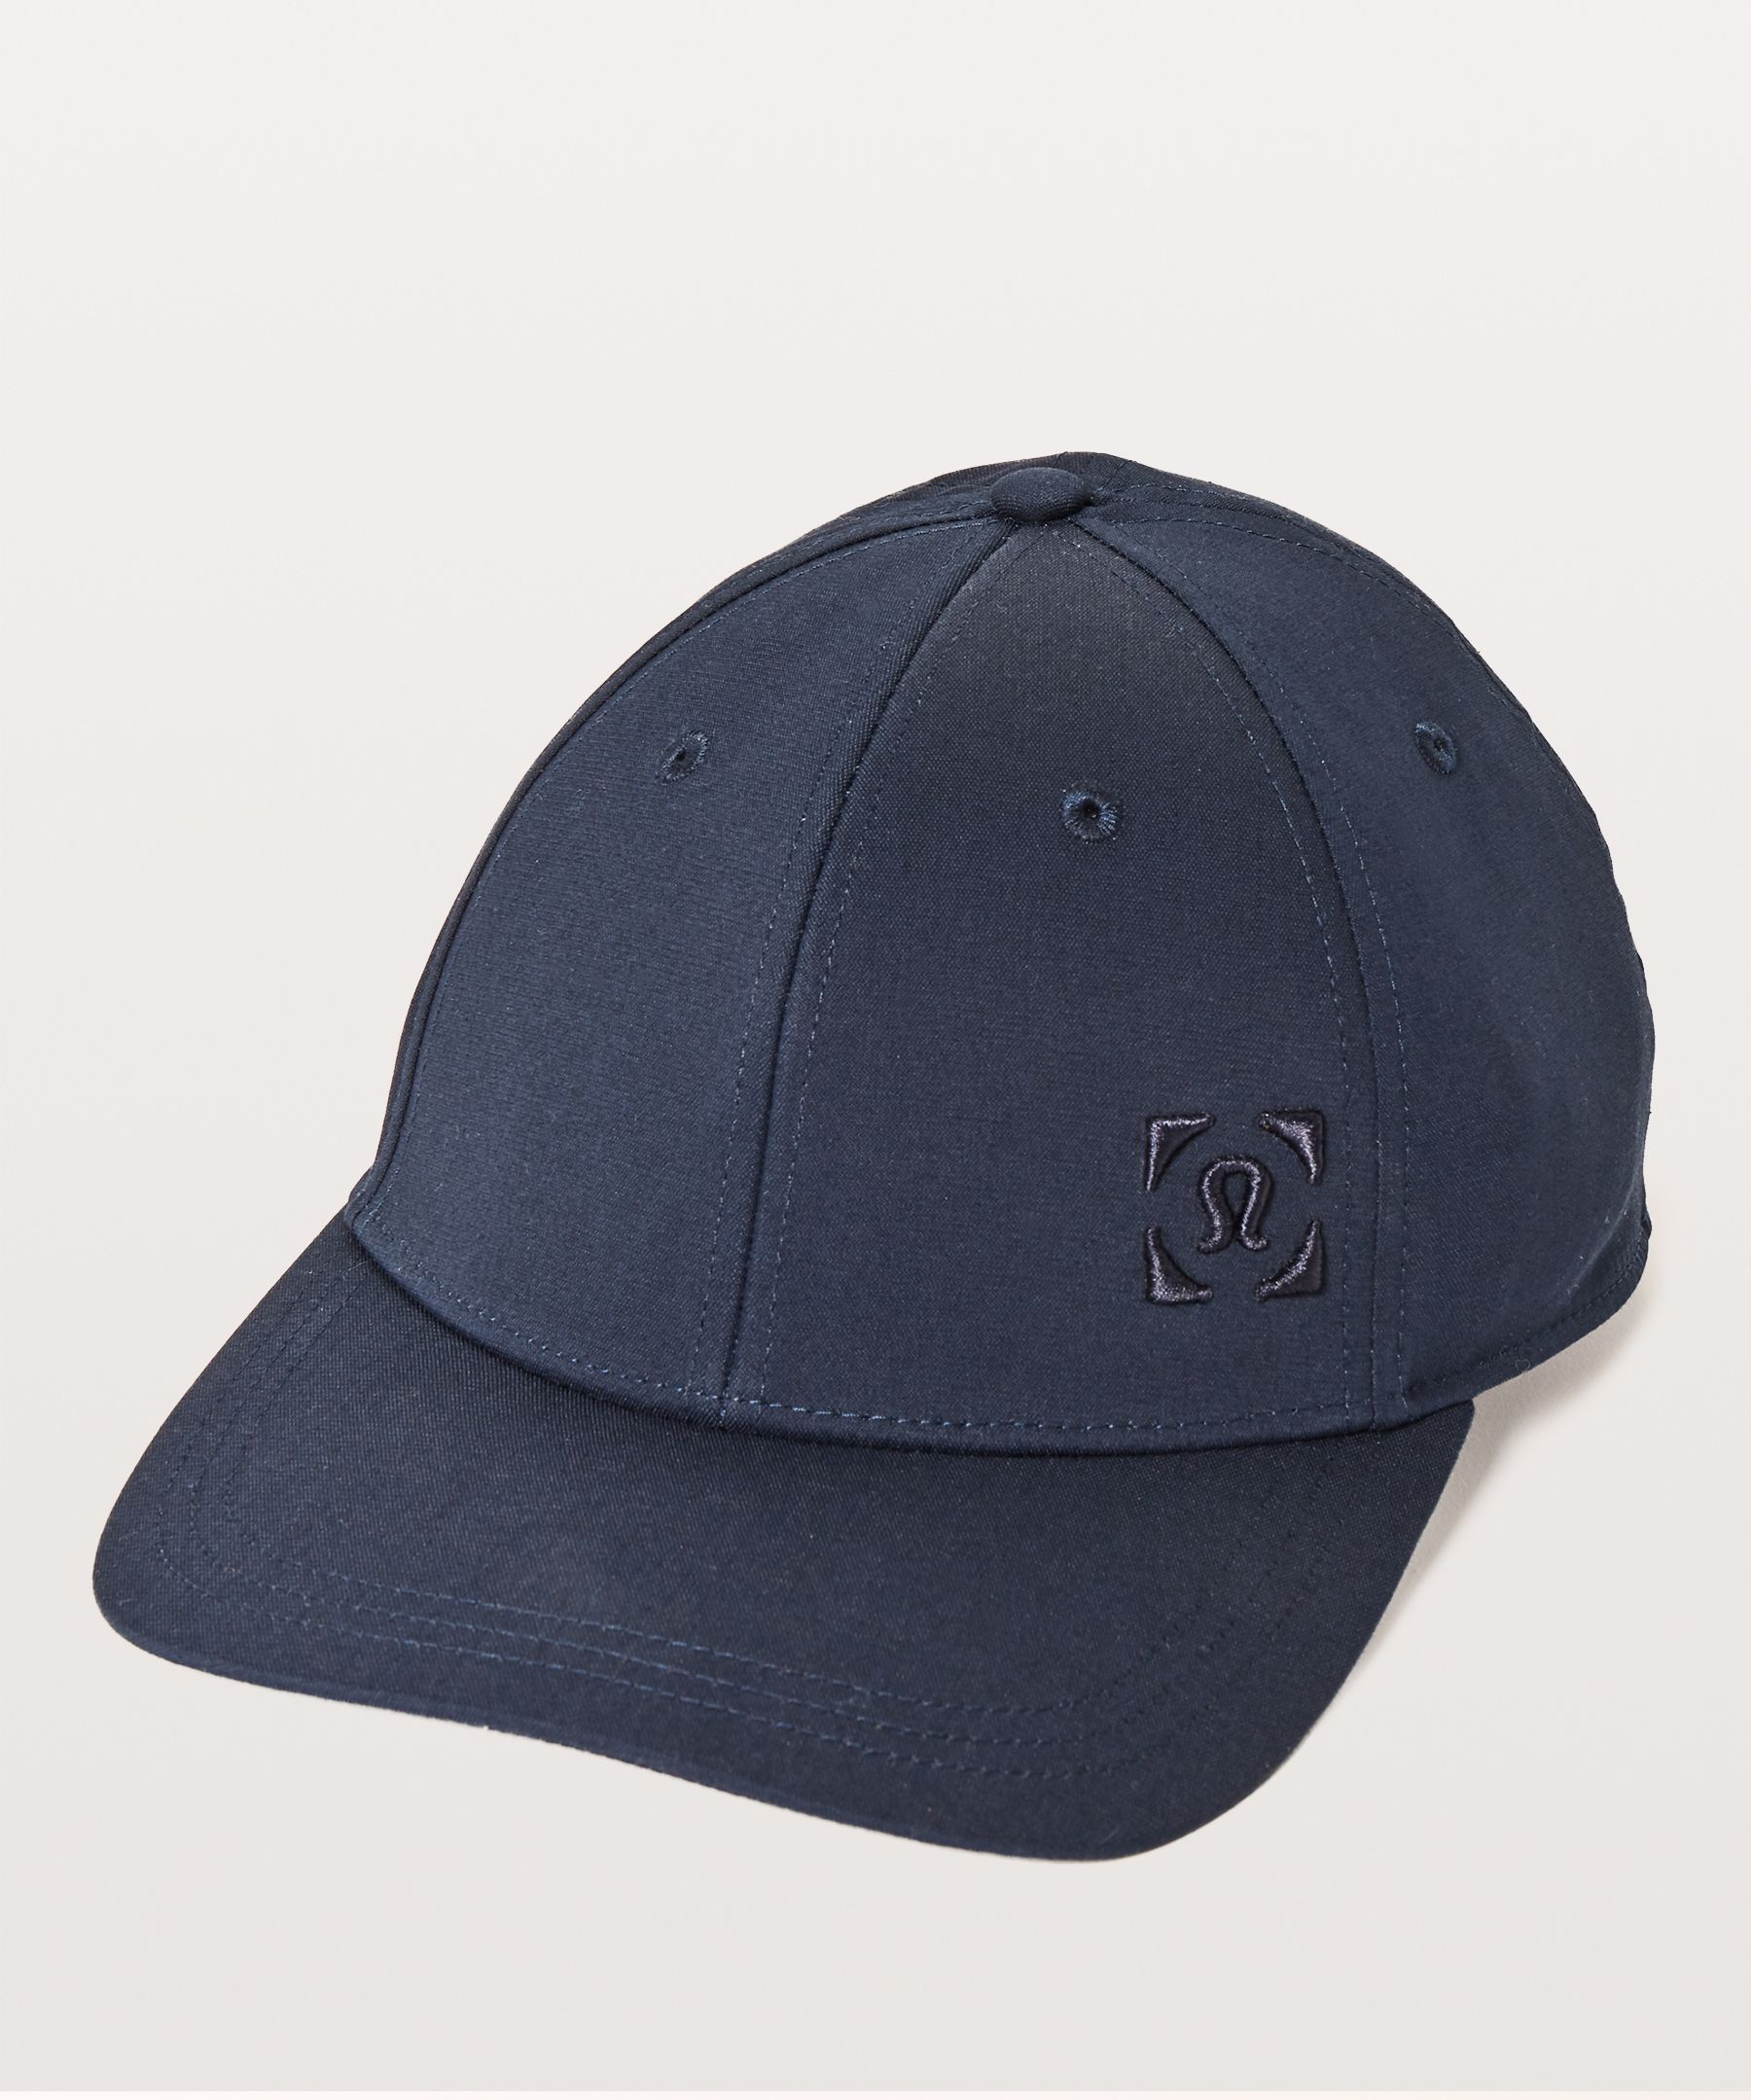 Lululemon On The Fly Ball Cap *stitched In True Navy